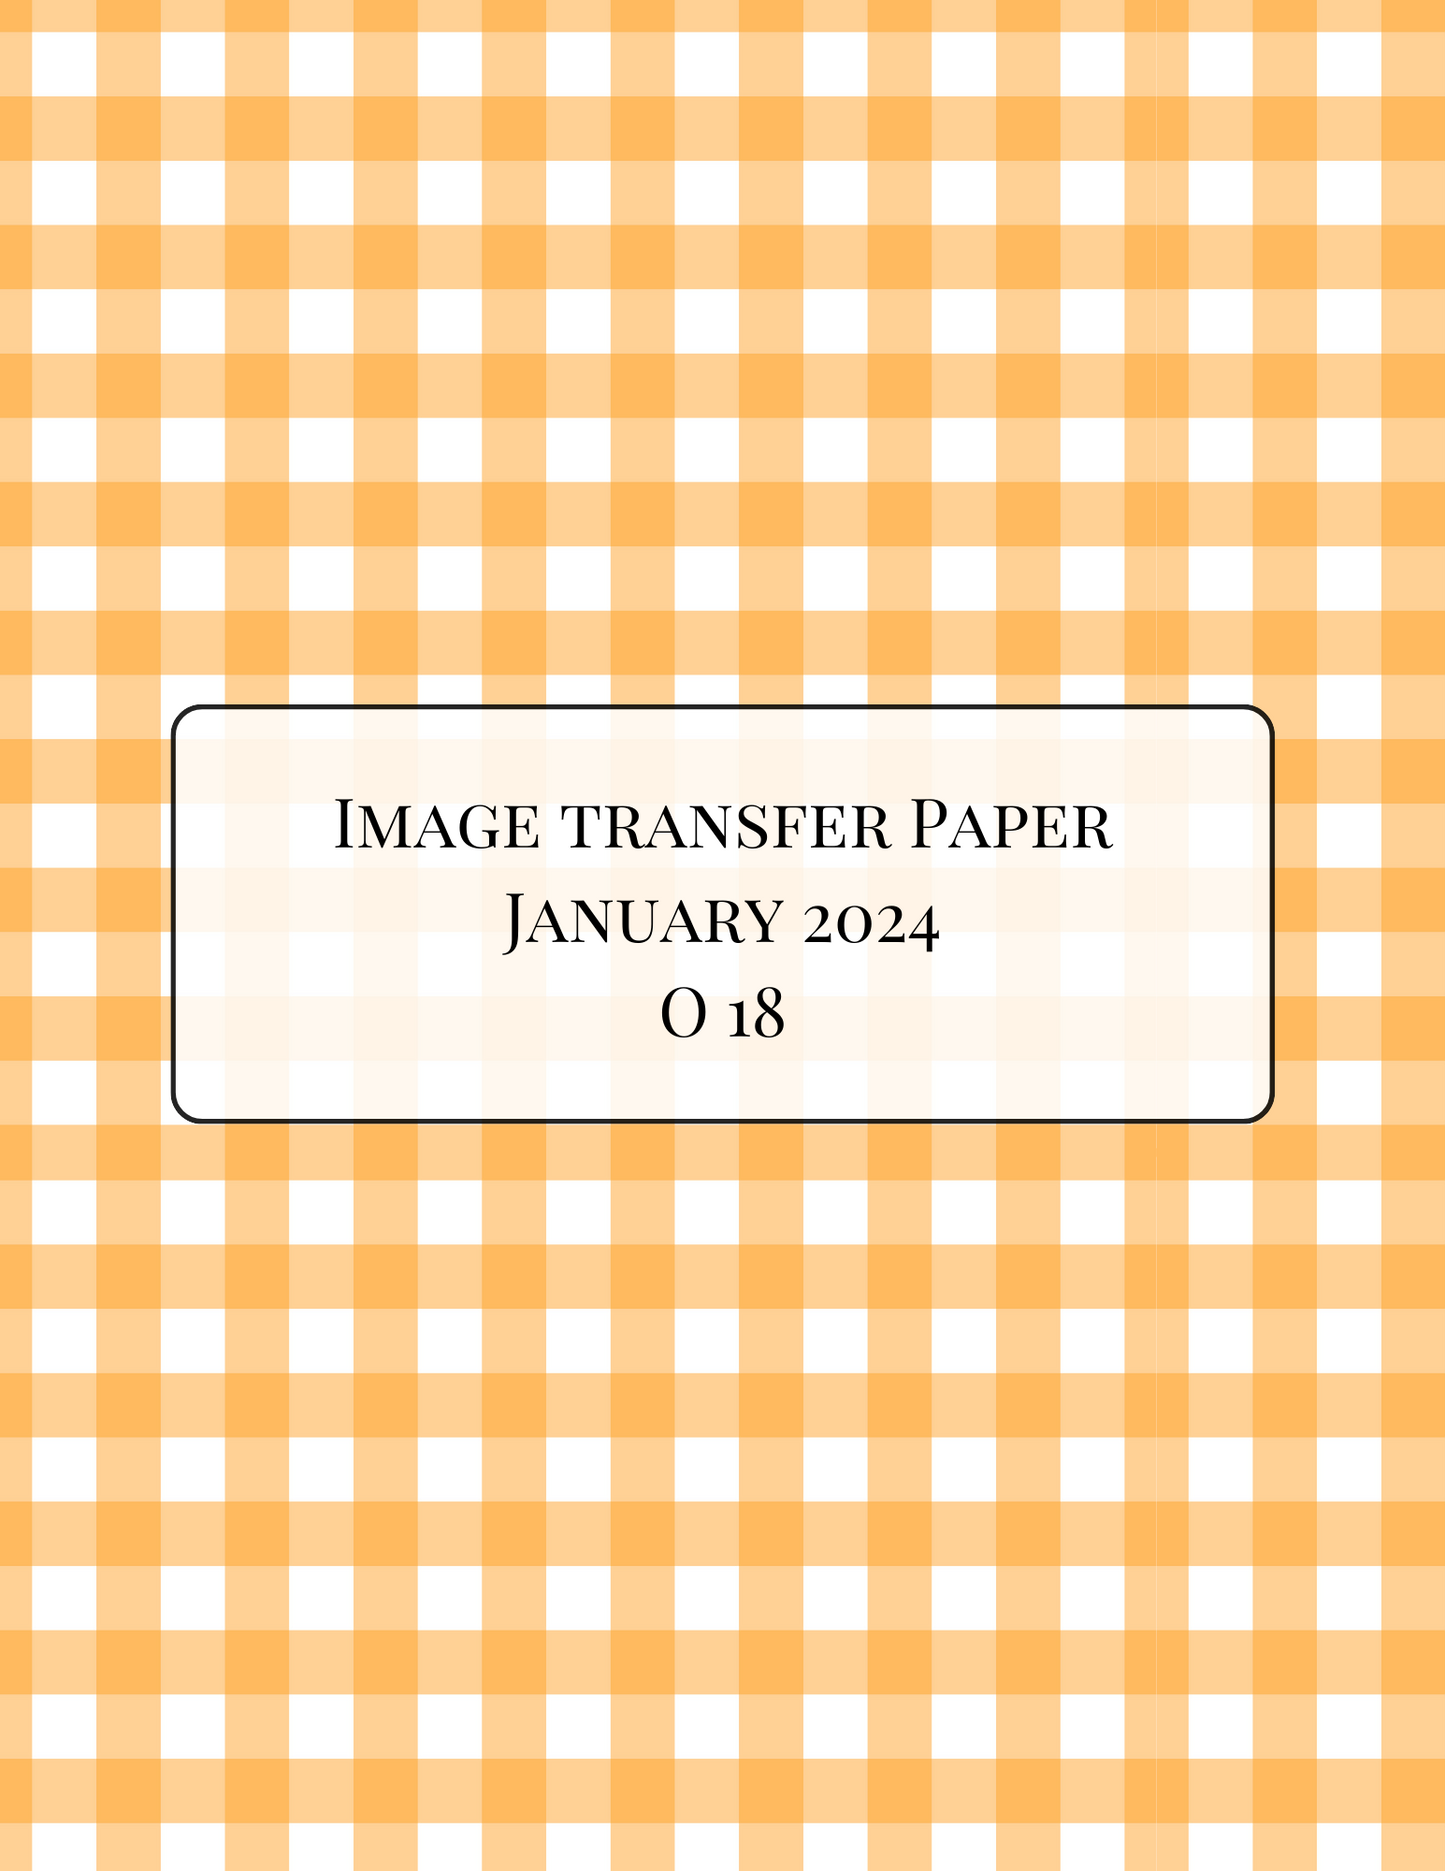 O18 Transfer Paper - January Launch